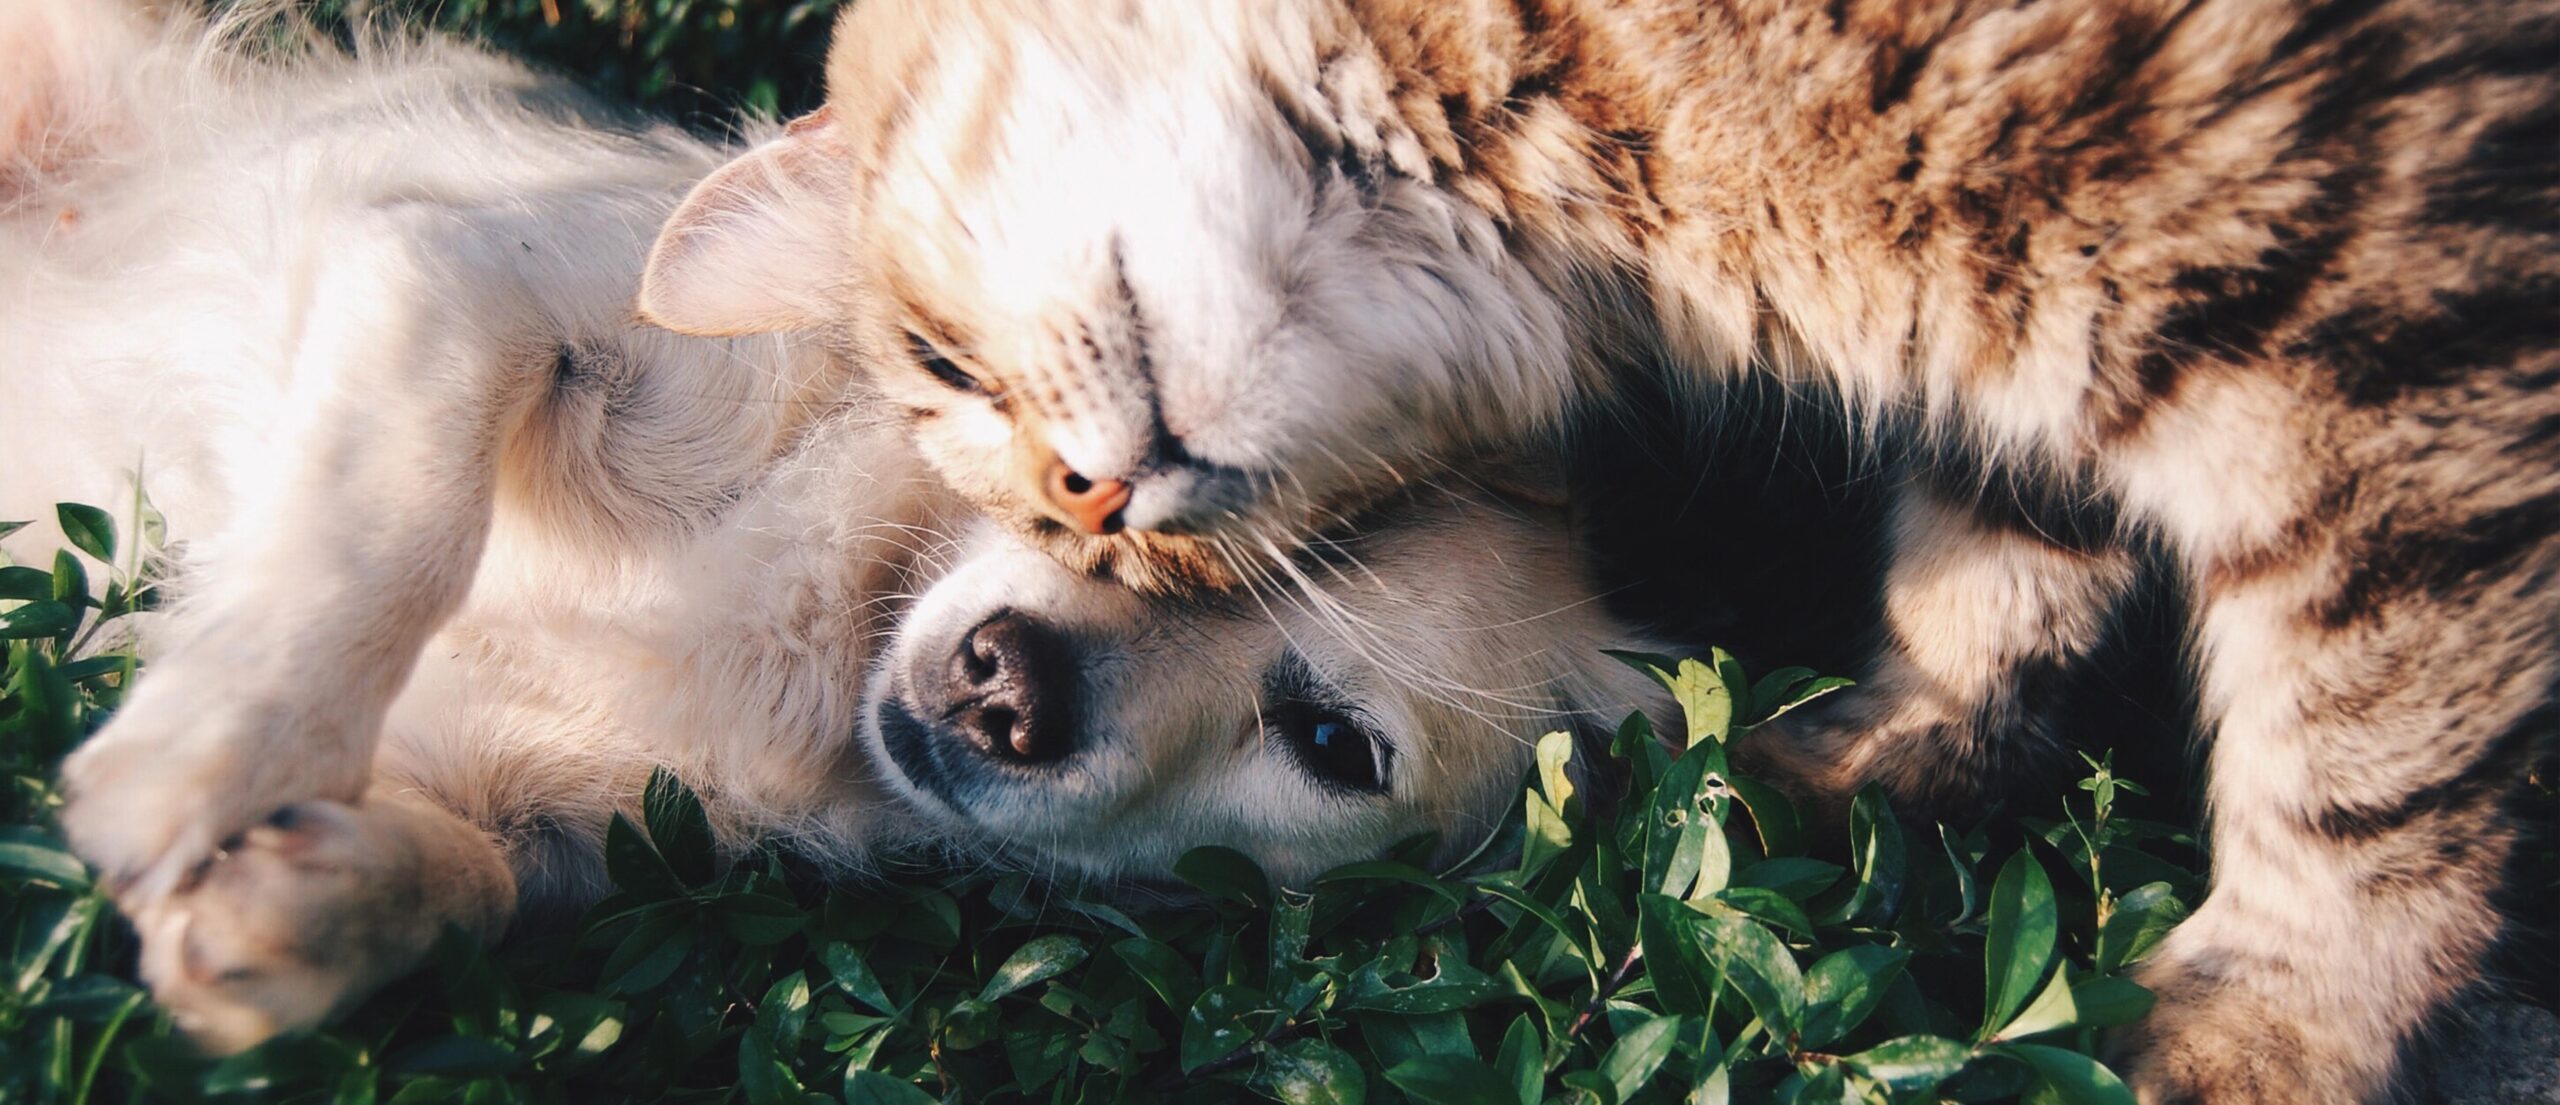 dog and cat in grass